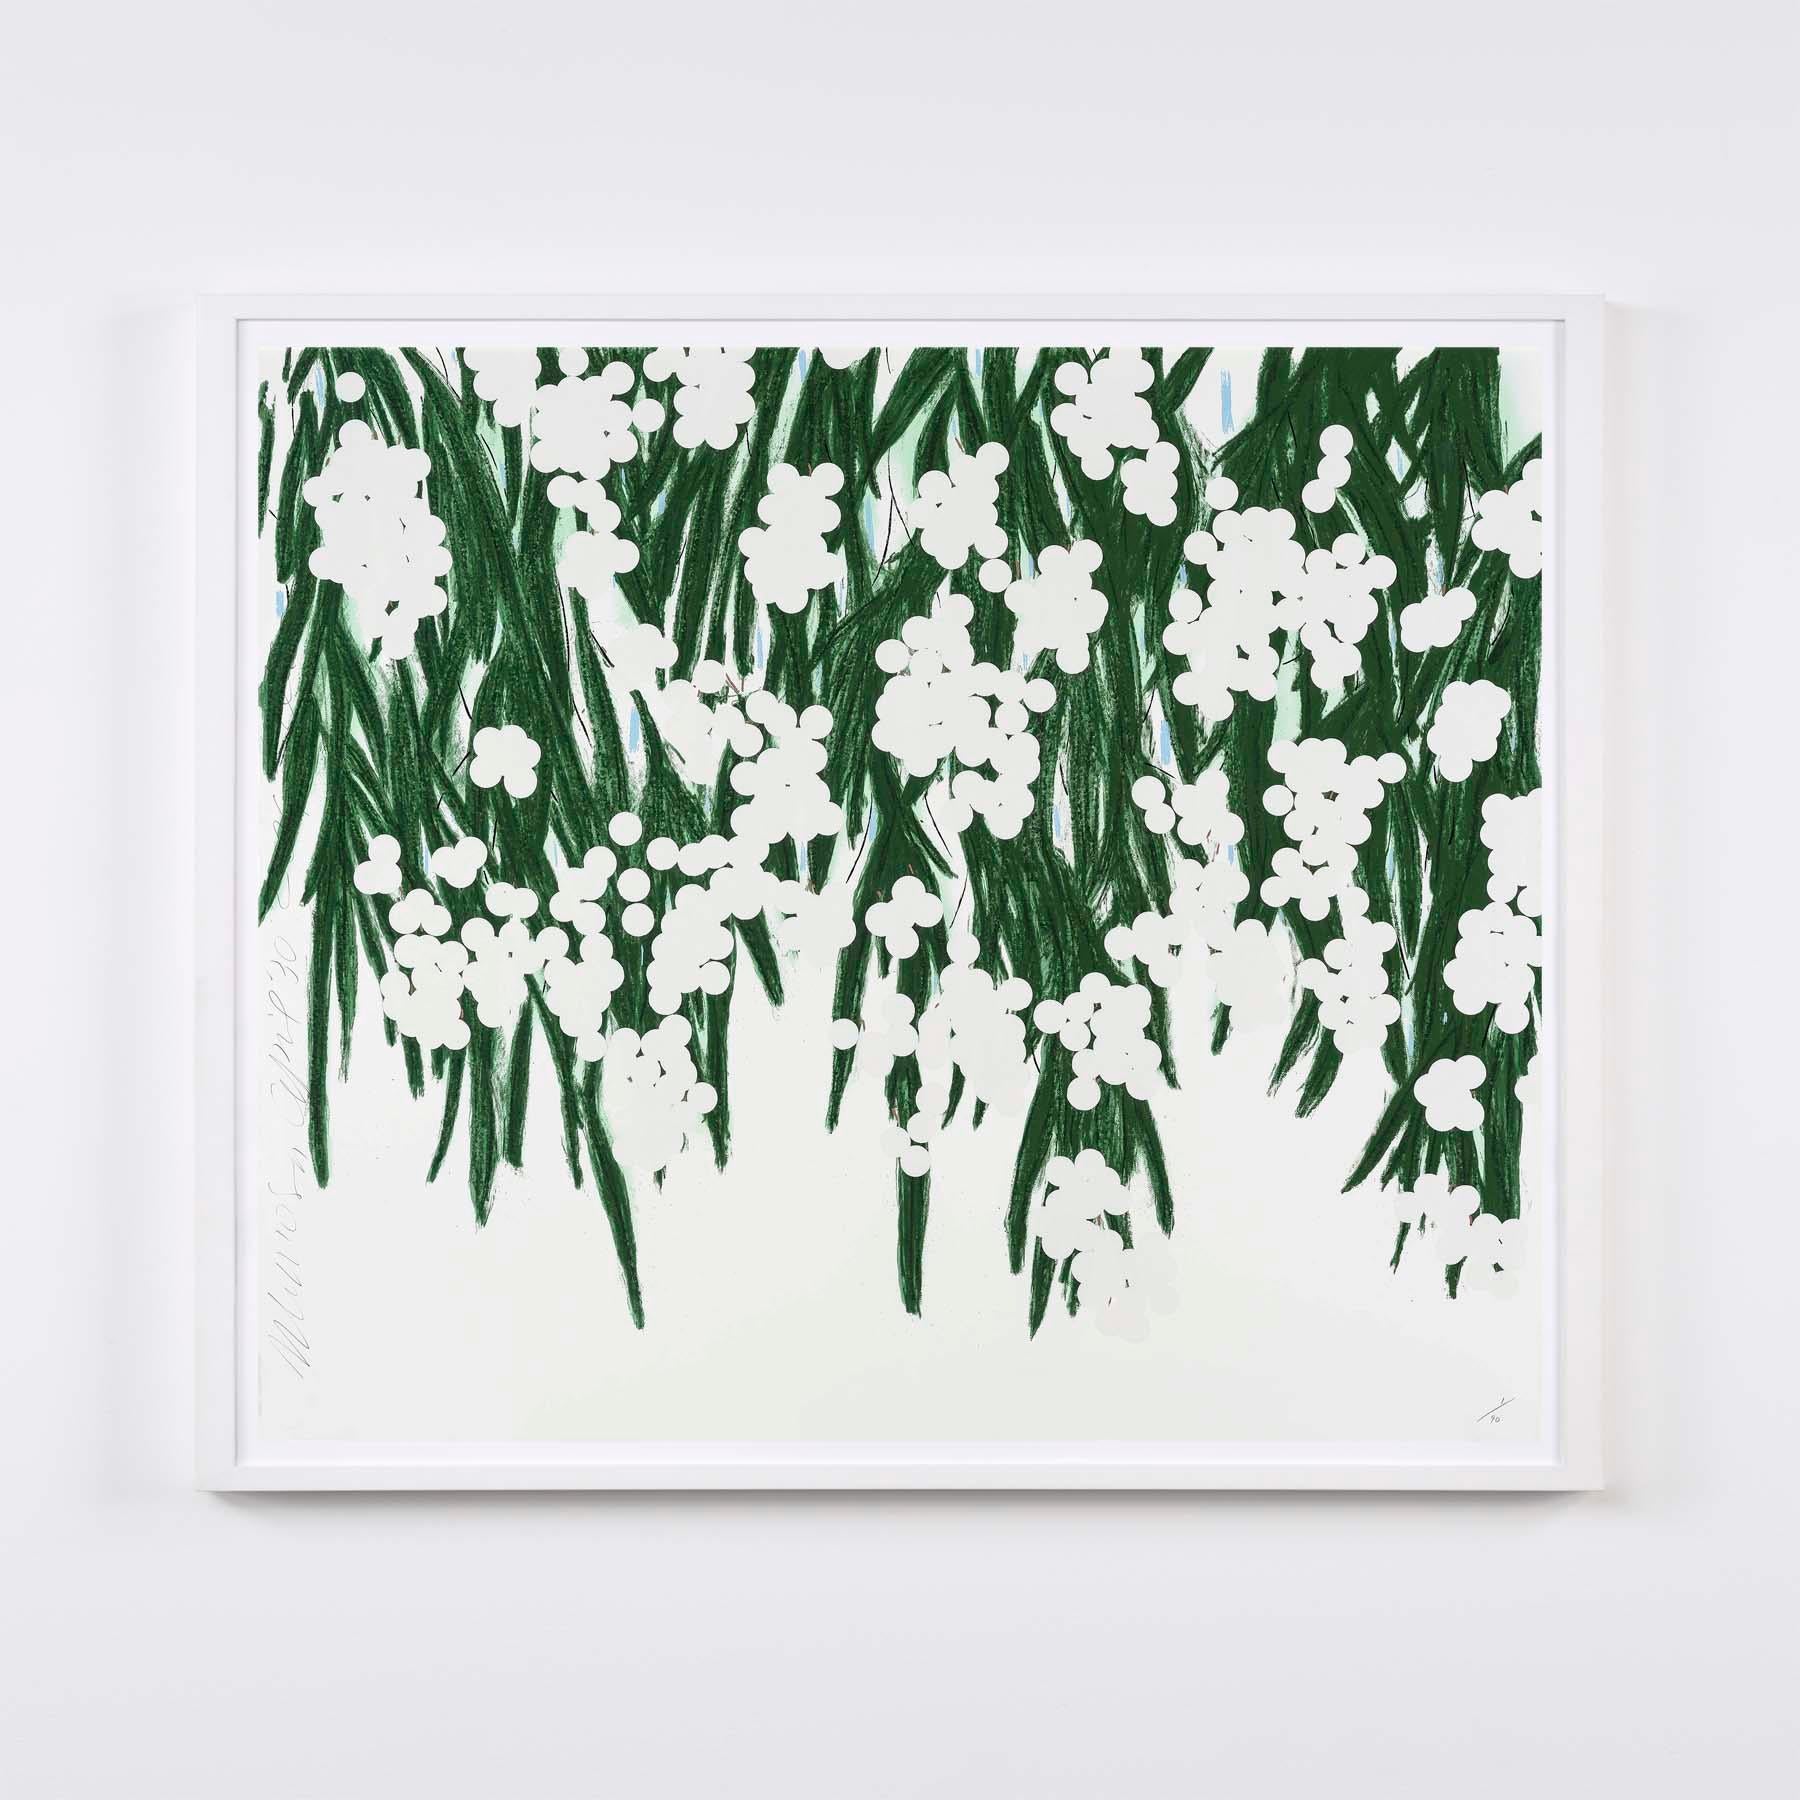 Mimosa, April 30 - Contemporary, 21st Century, Silkscreen, Mimosa, Flower, White - Print by Donald Sultan